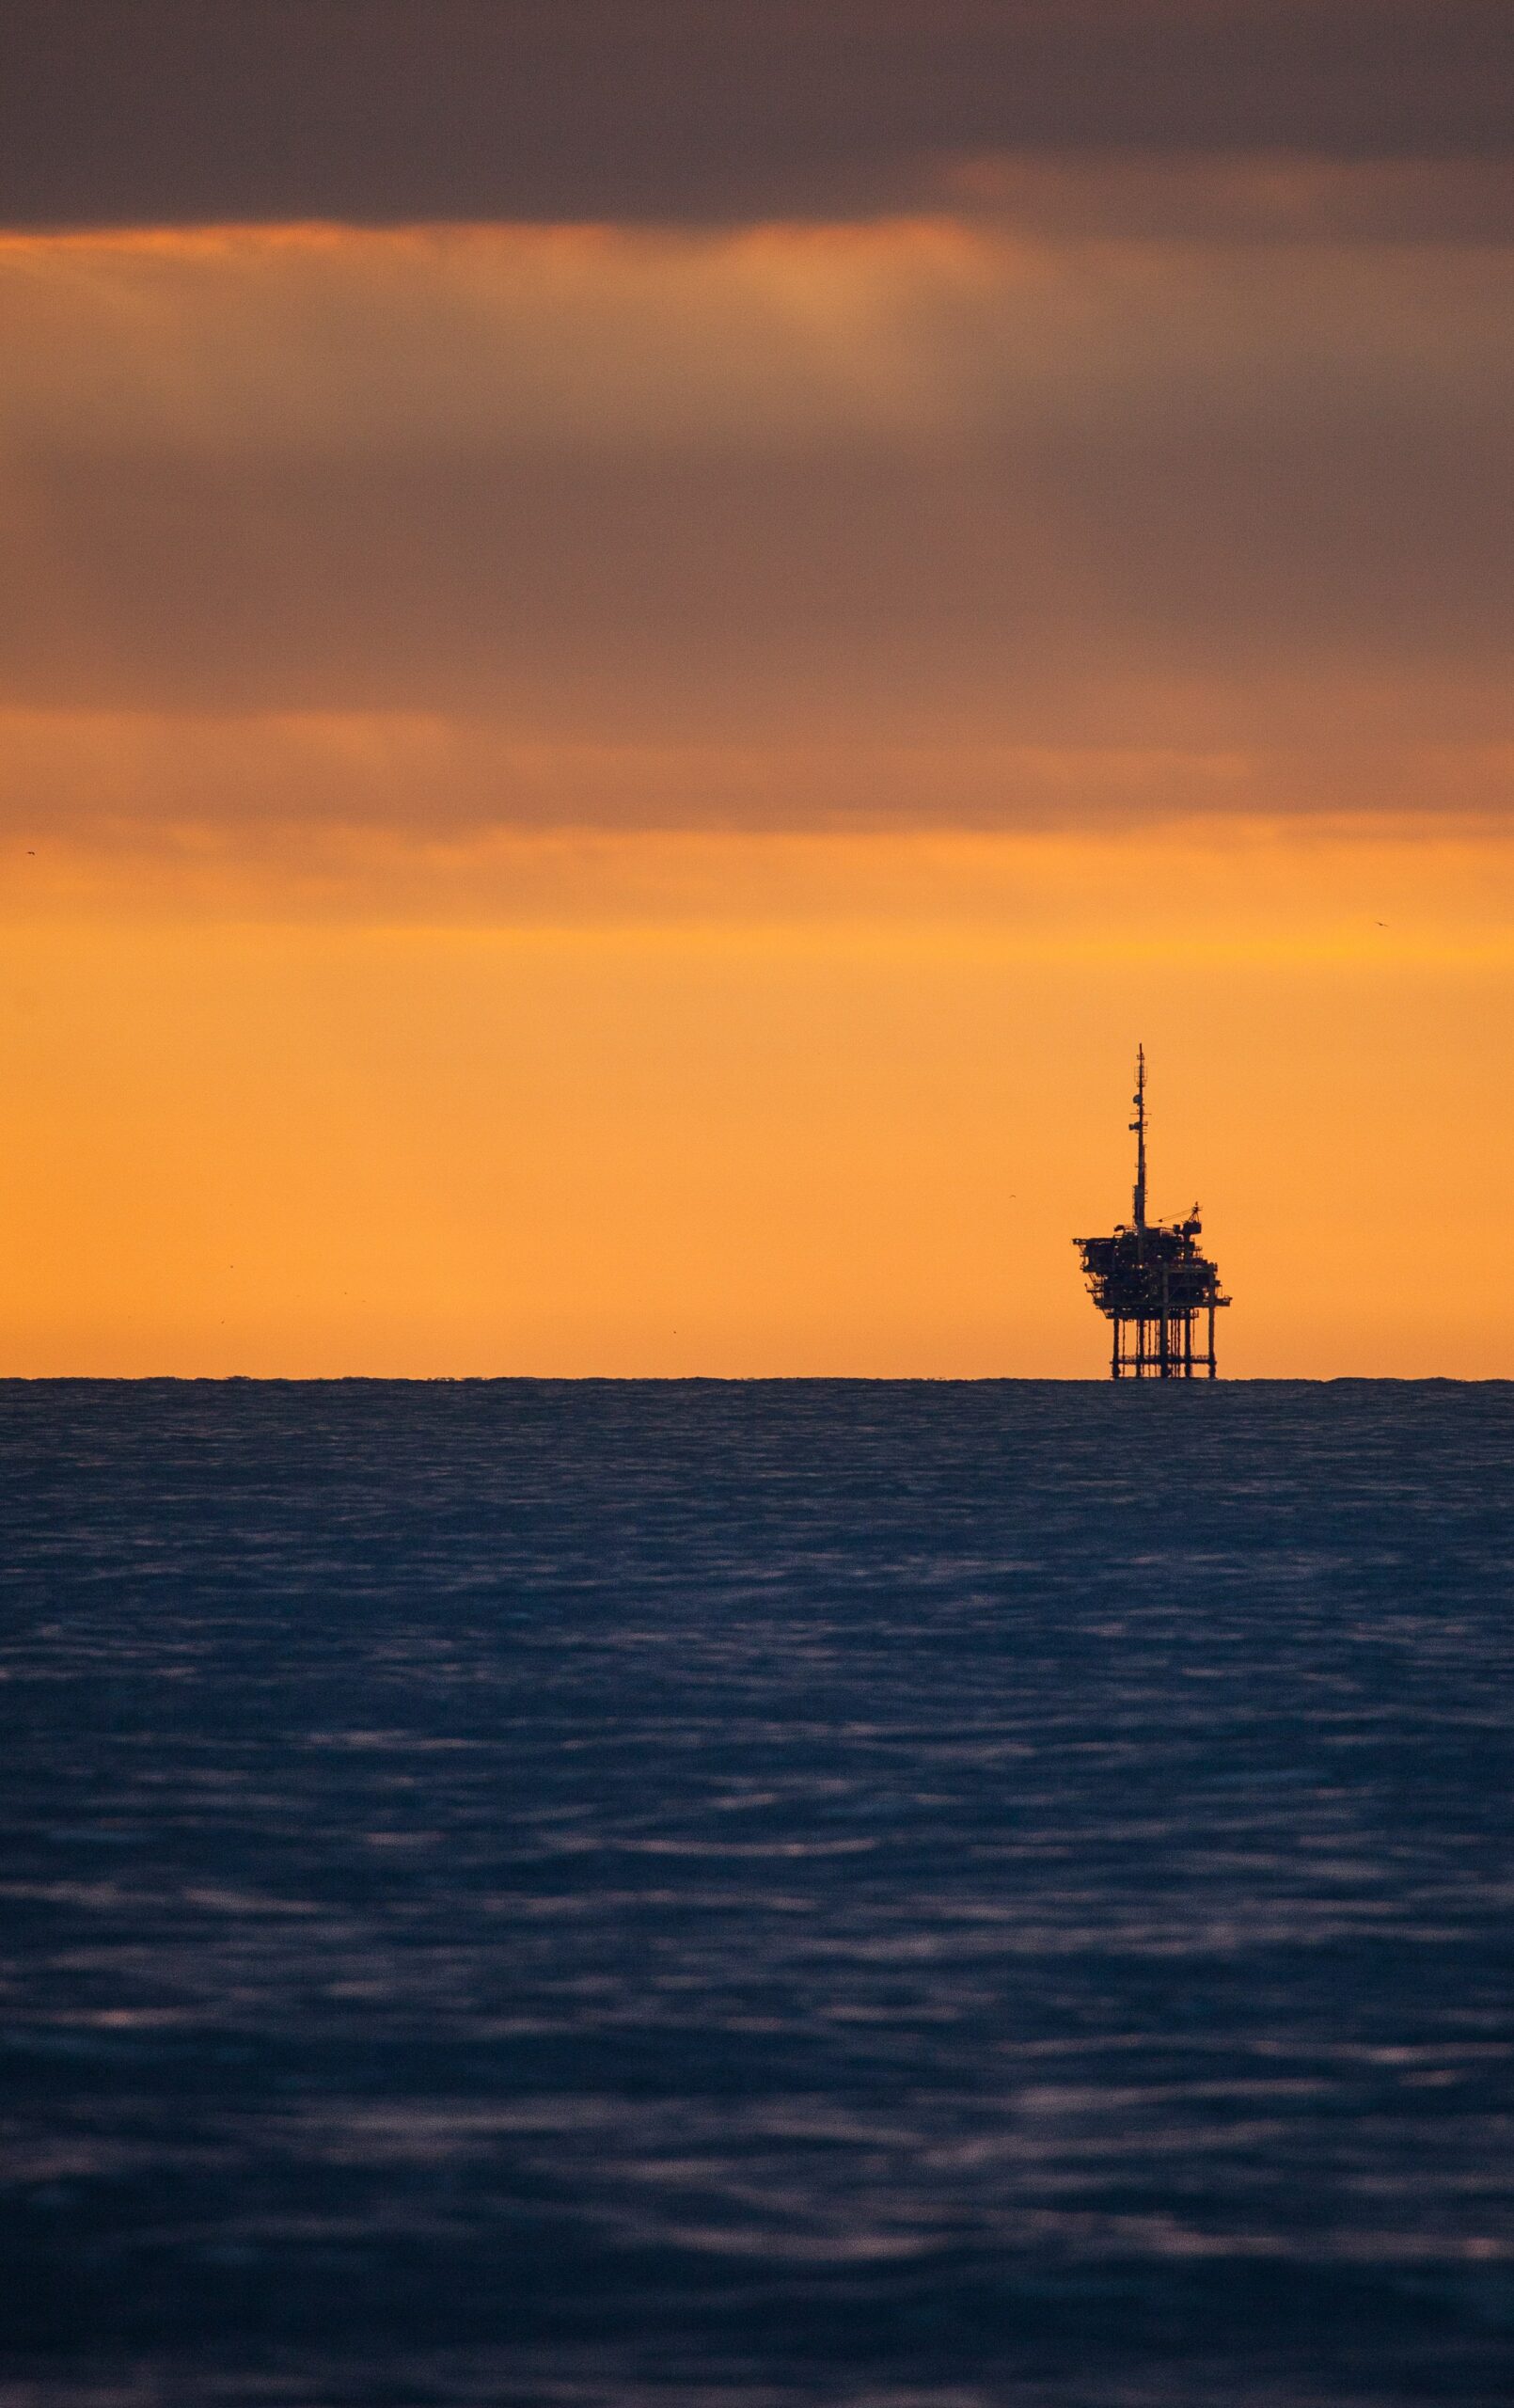 A Serious Look at Offshore Oil Drilling